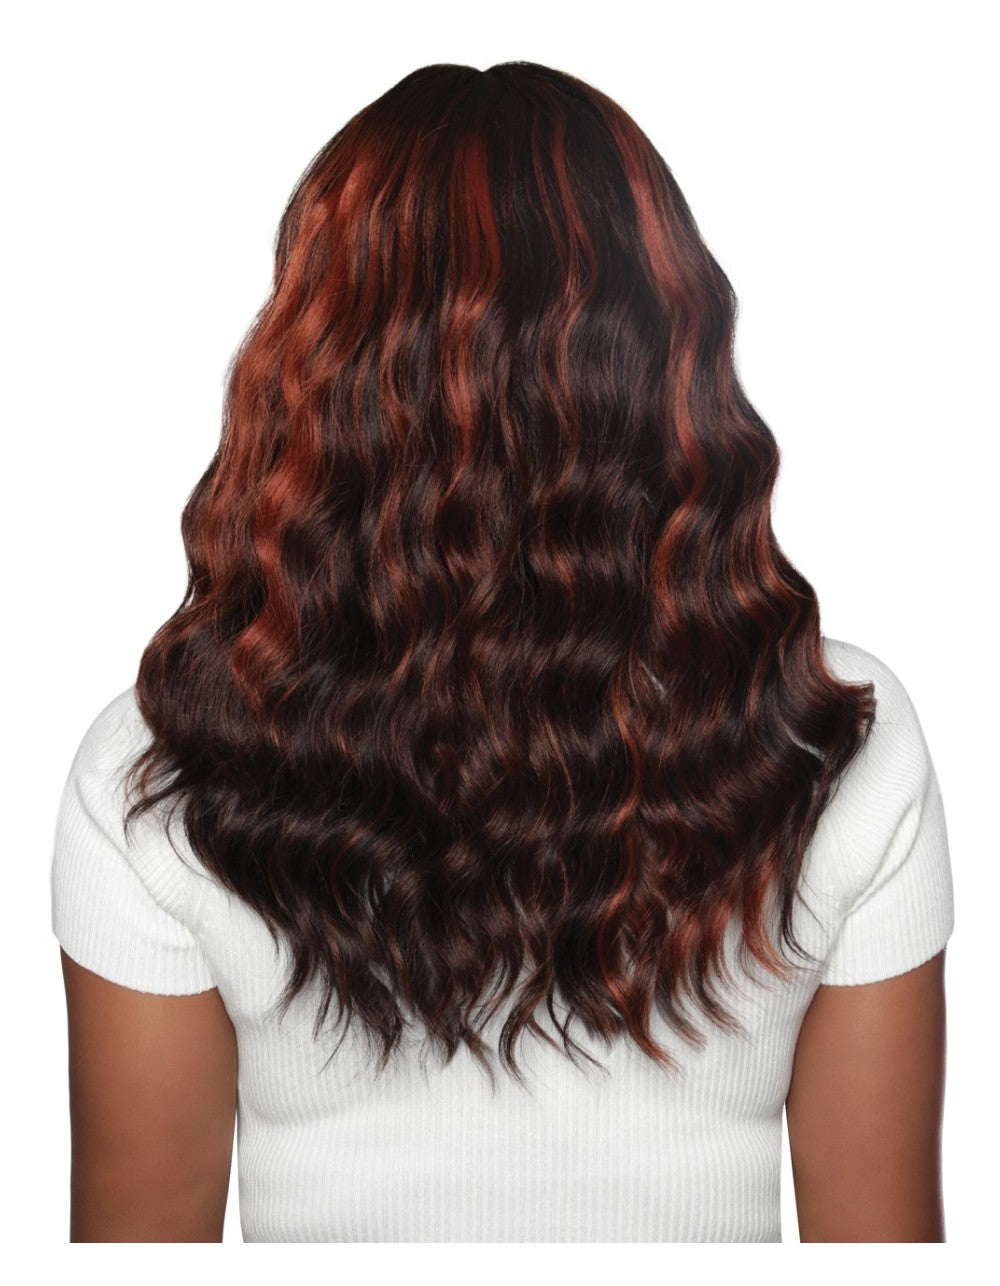 Mane Concept Brown Sugar Everyday Full Wig - Windy Day BSEV102 - Elevate Styles